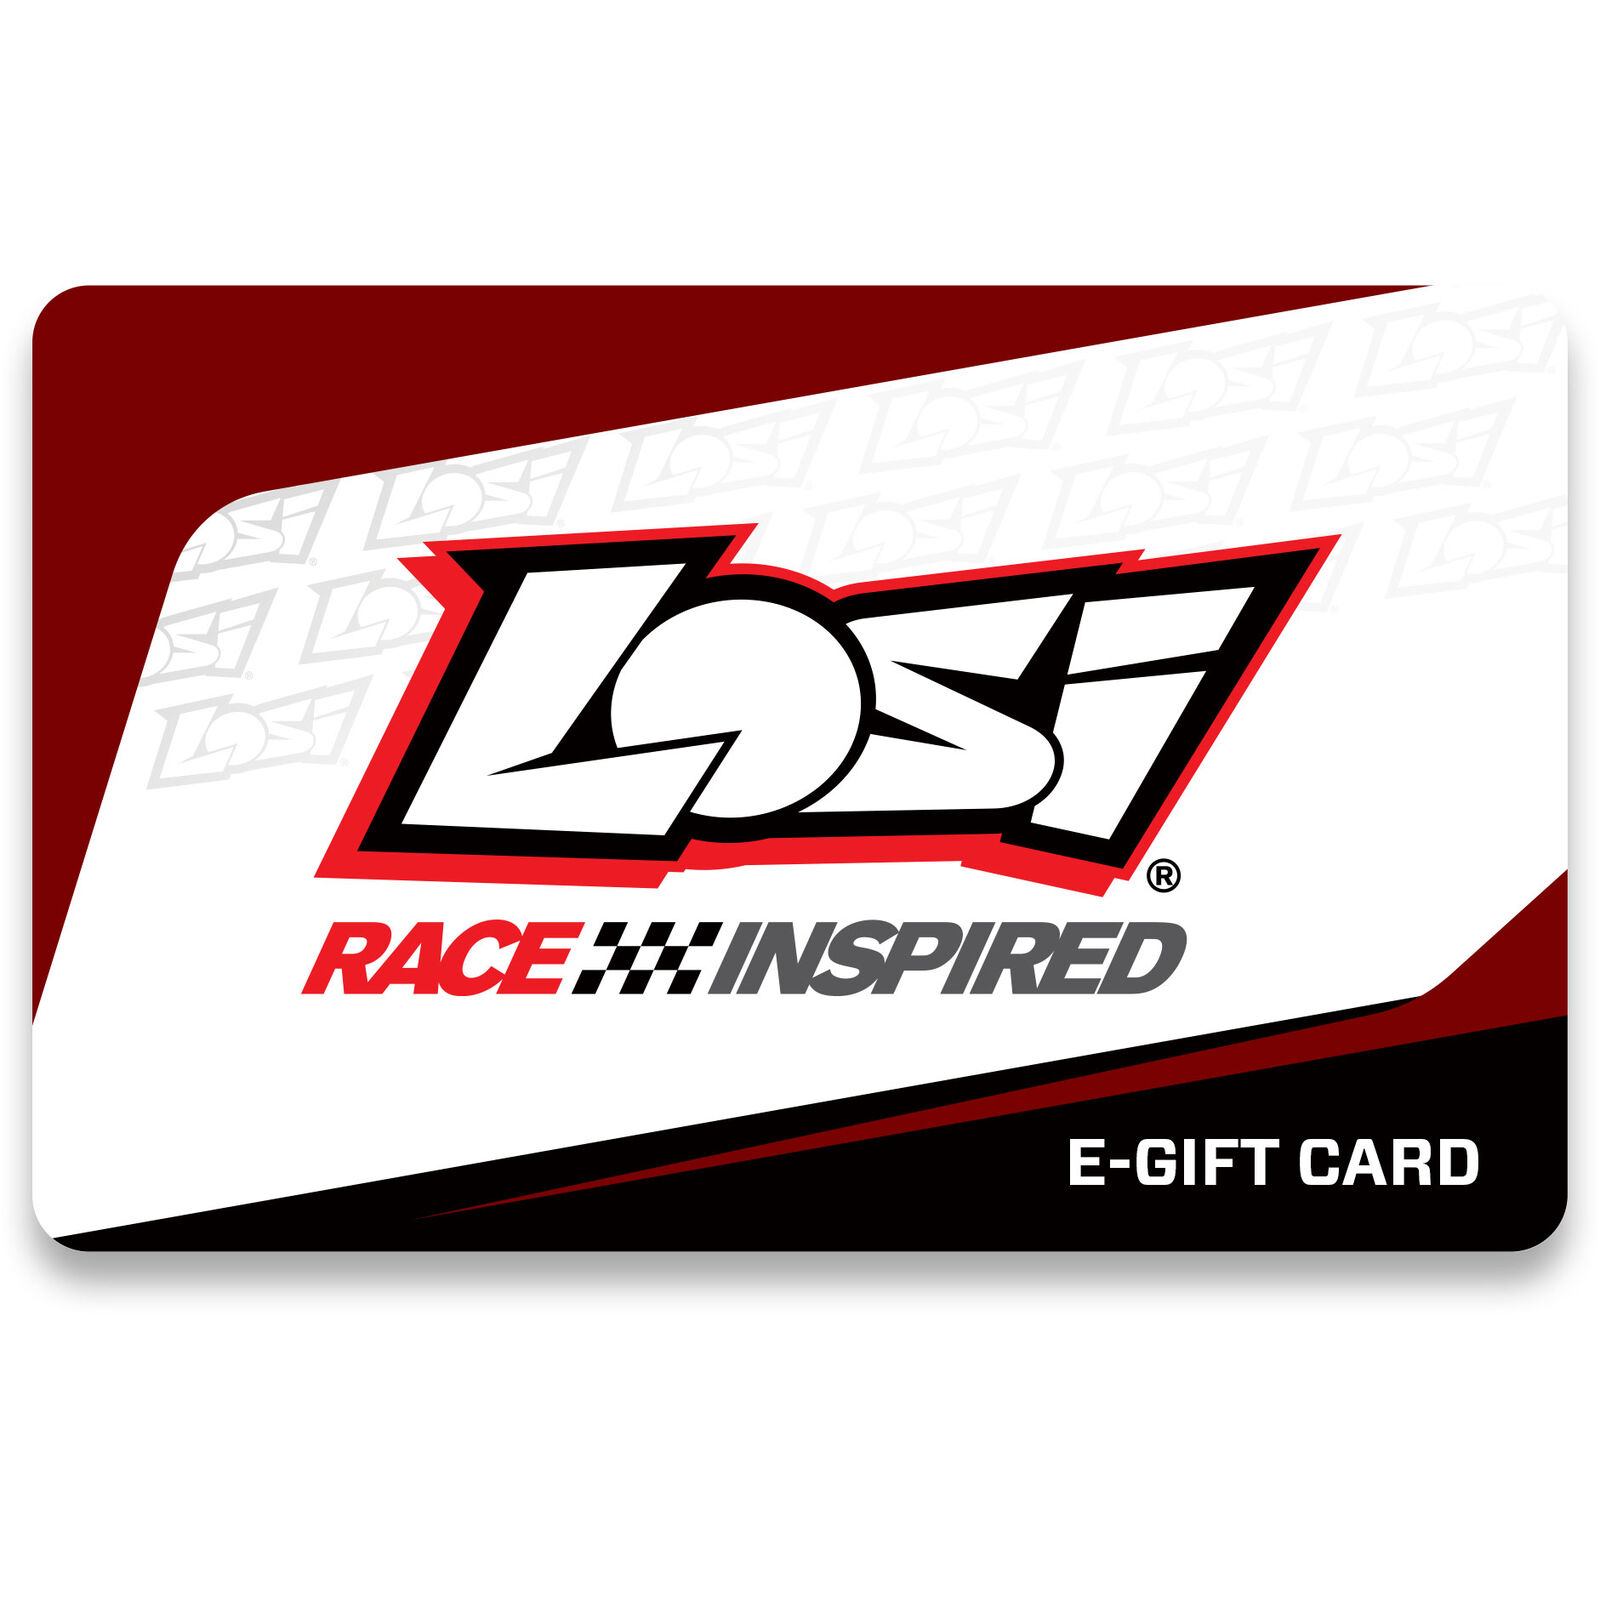 E-Gift Card$75 (emailed)